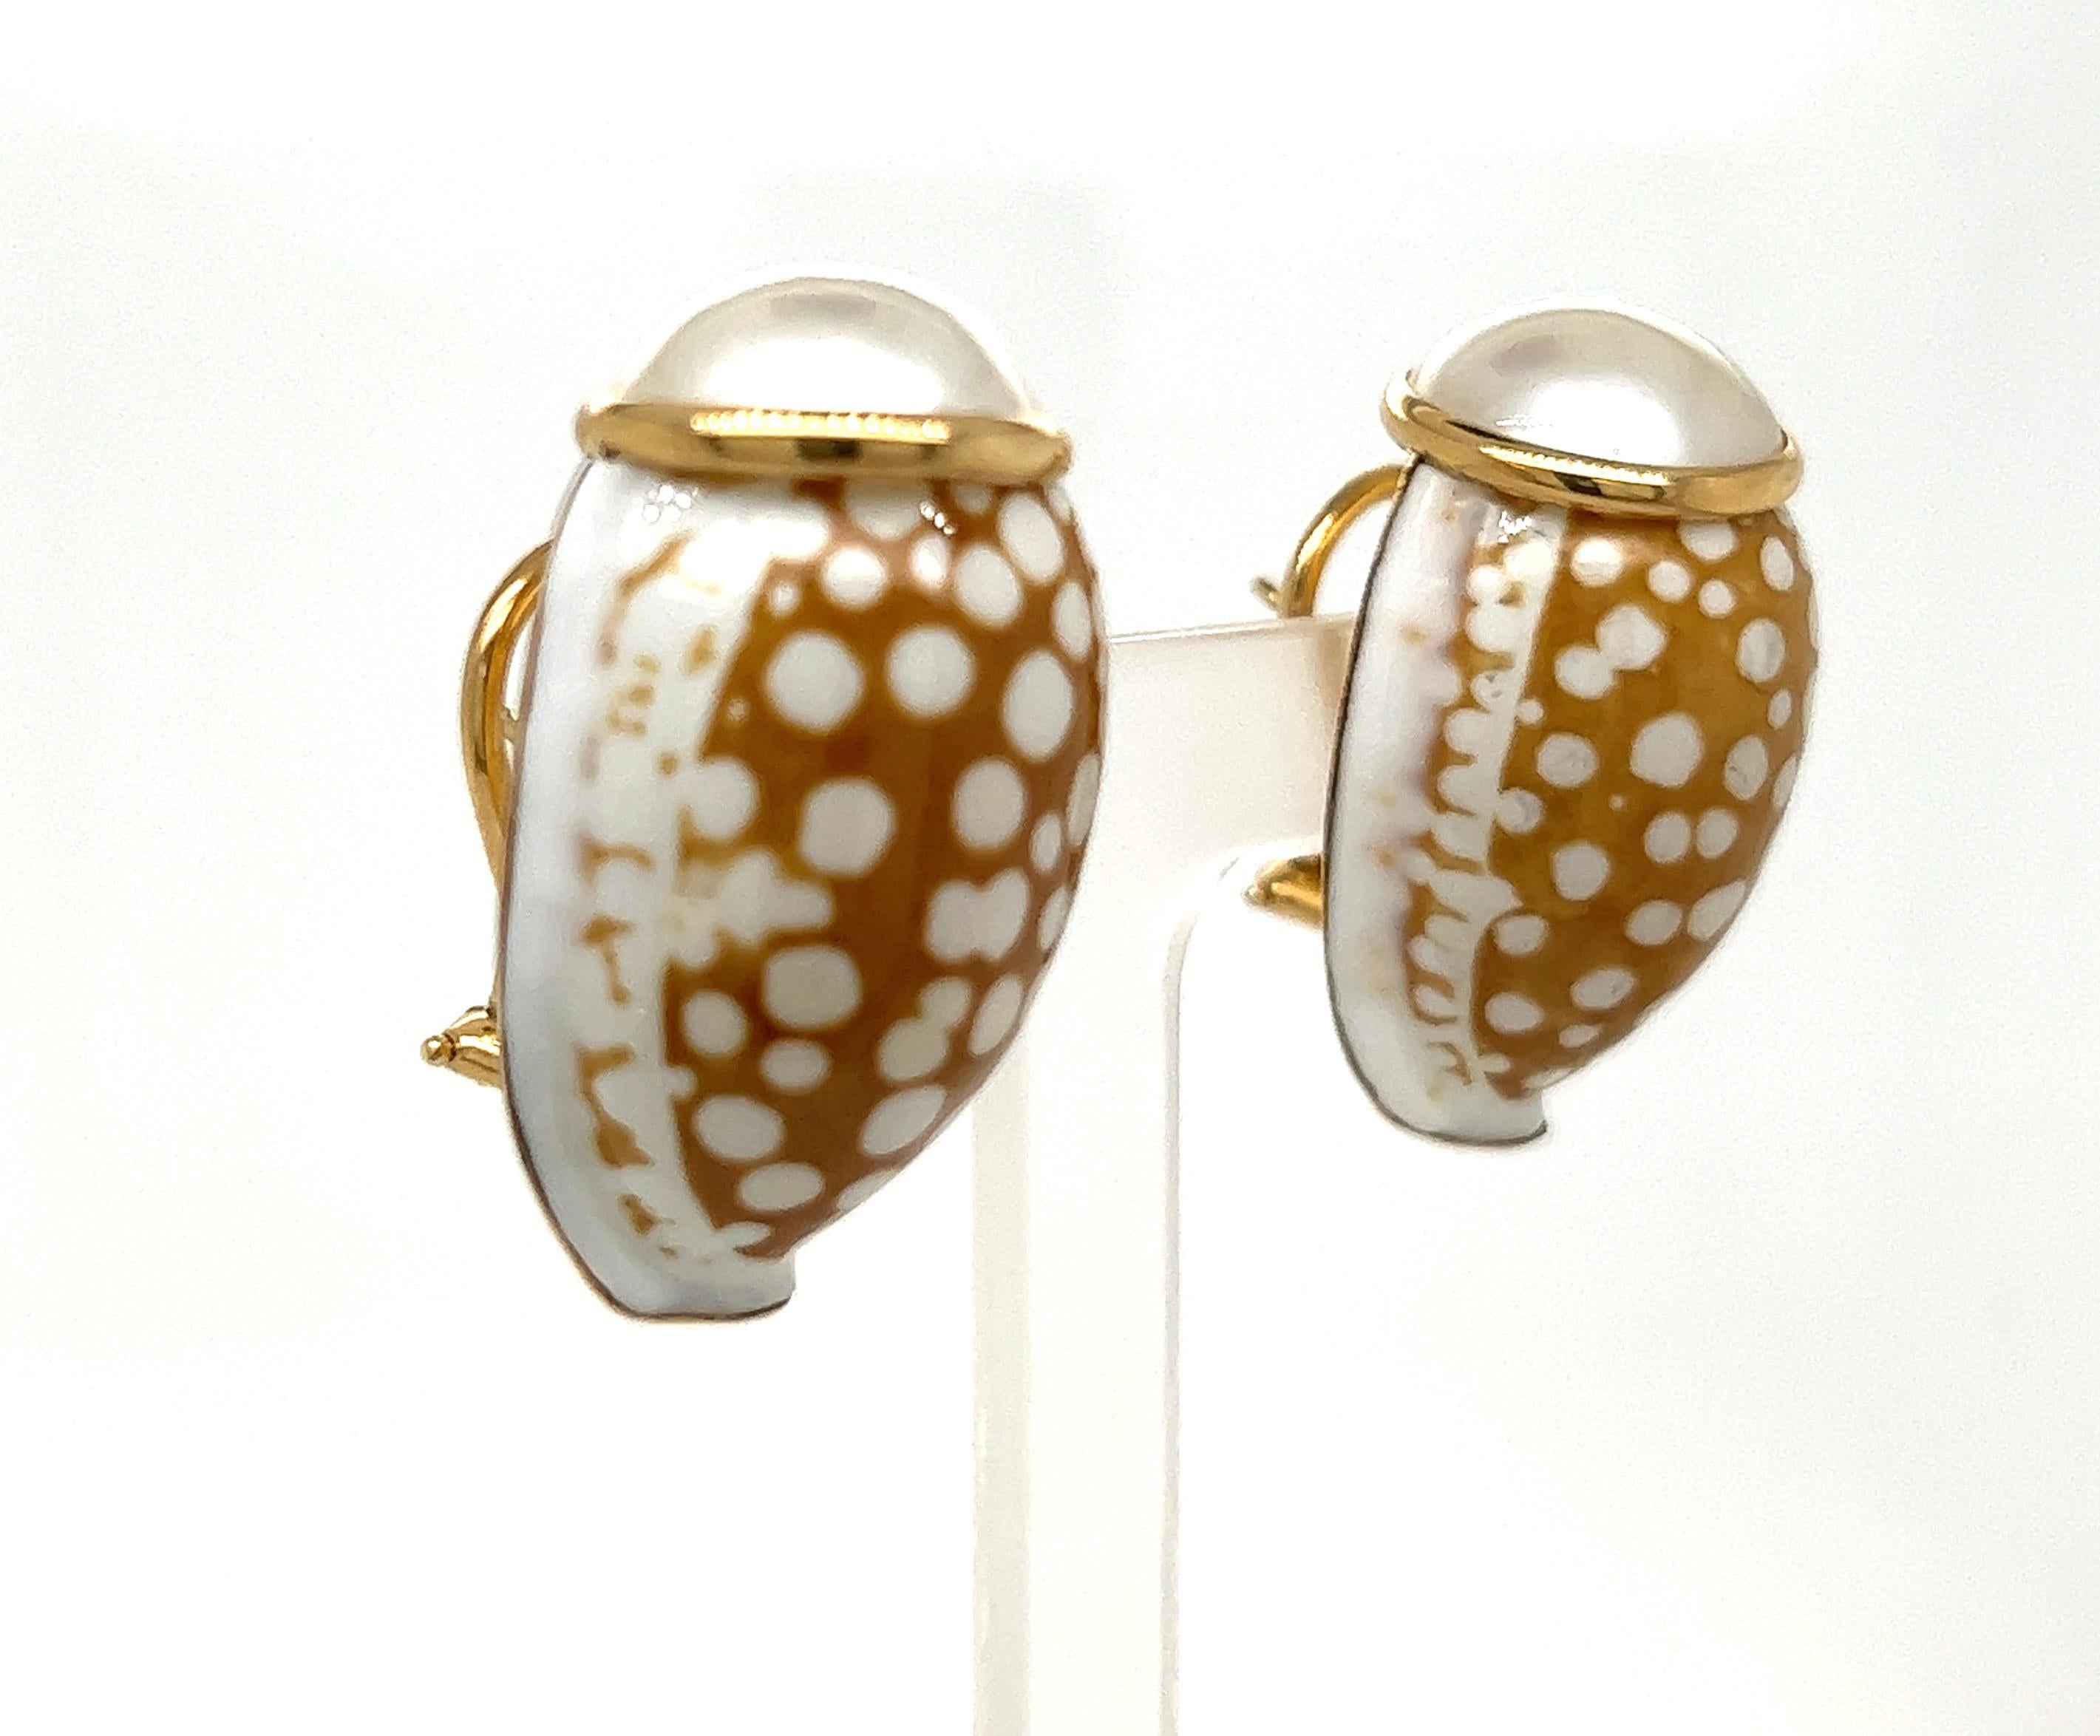 Unique playful shell earrings with an elegant twist with white freshwater pearls on top. Set in 14k yellow gold.
#61482